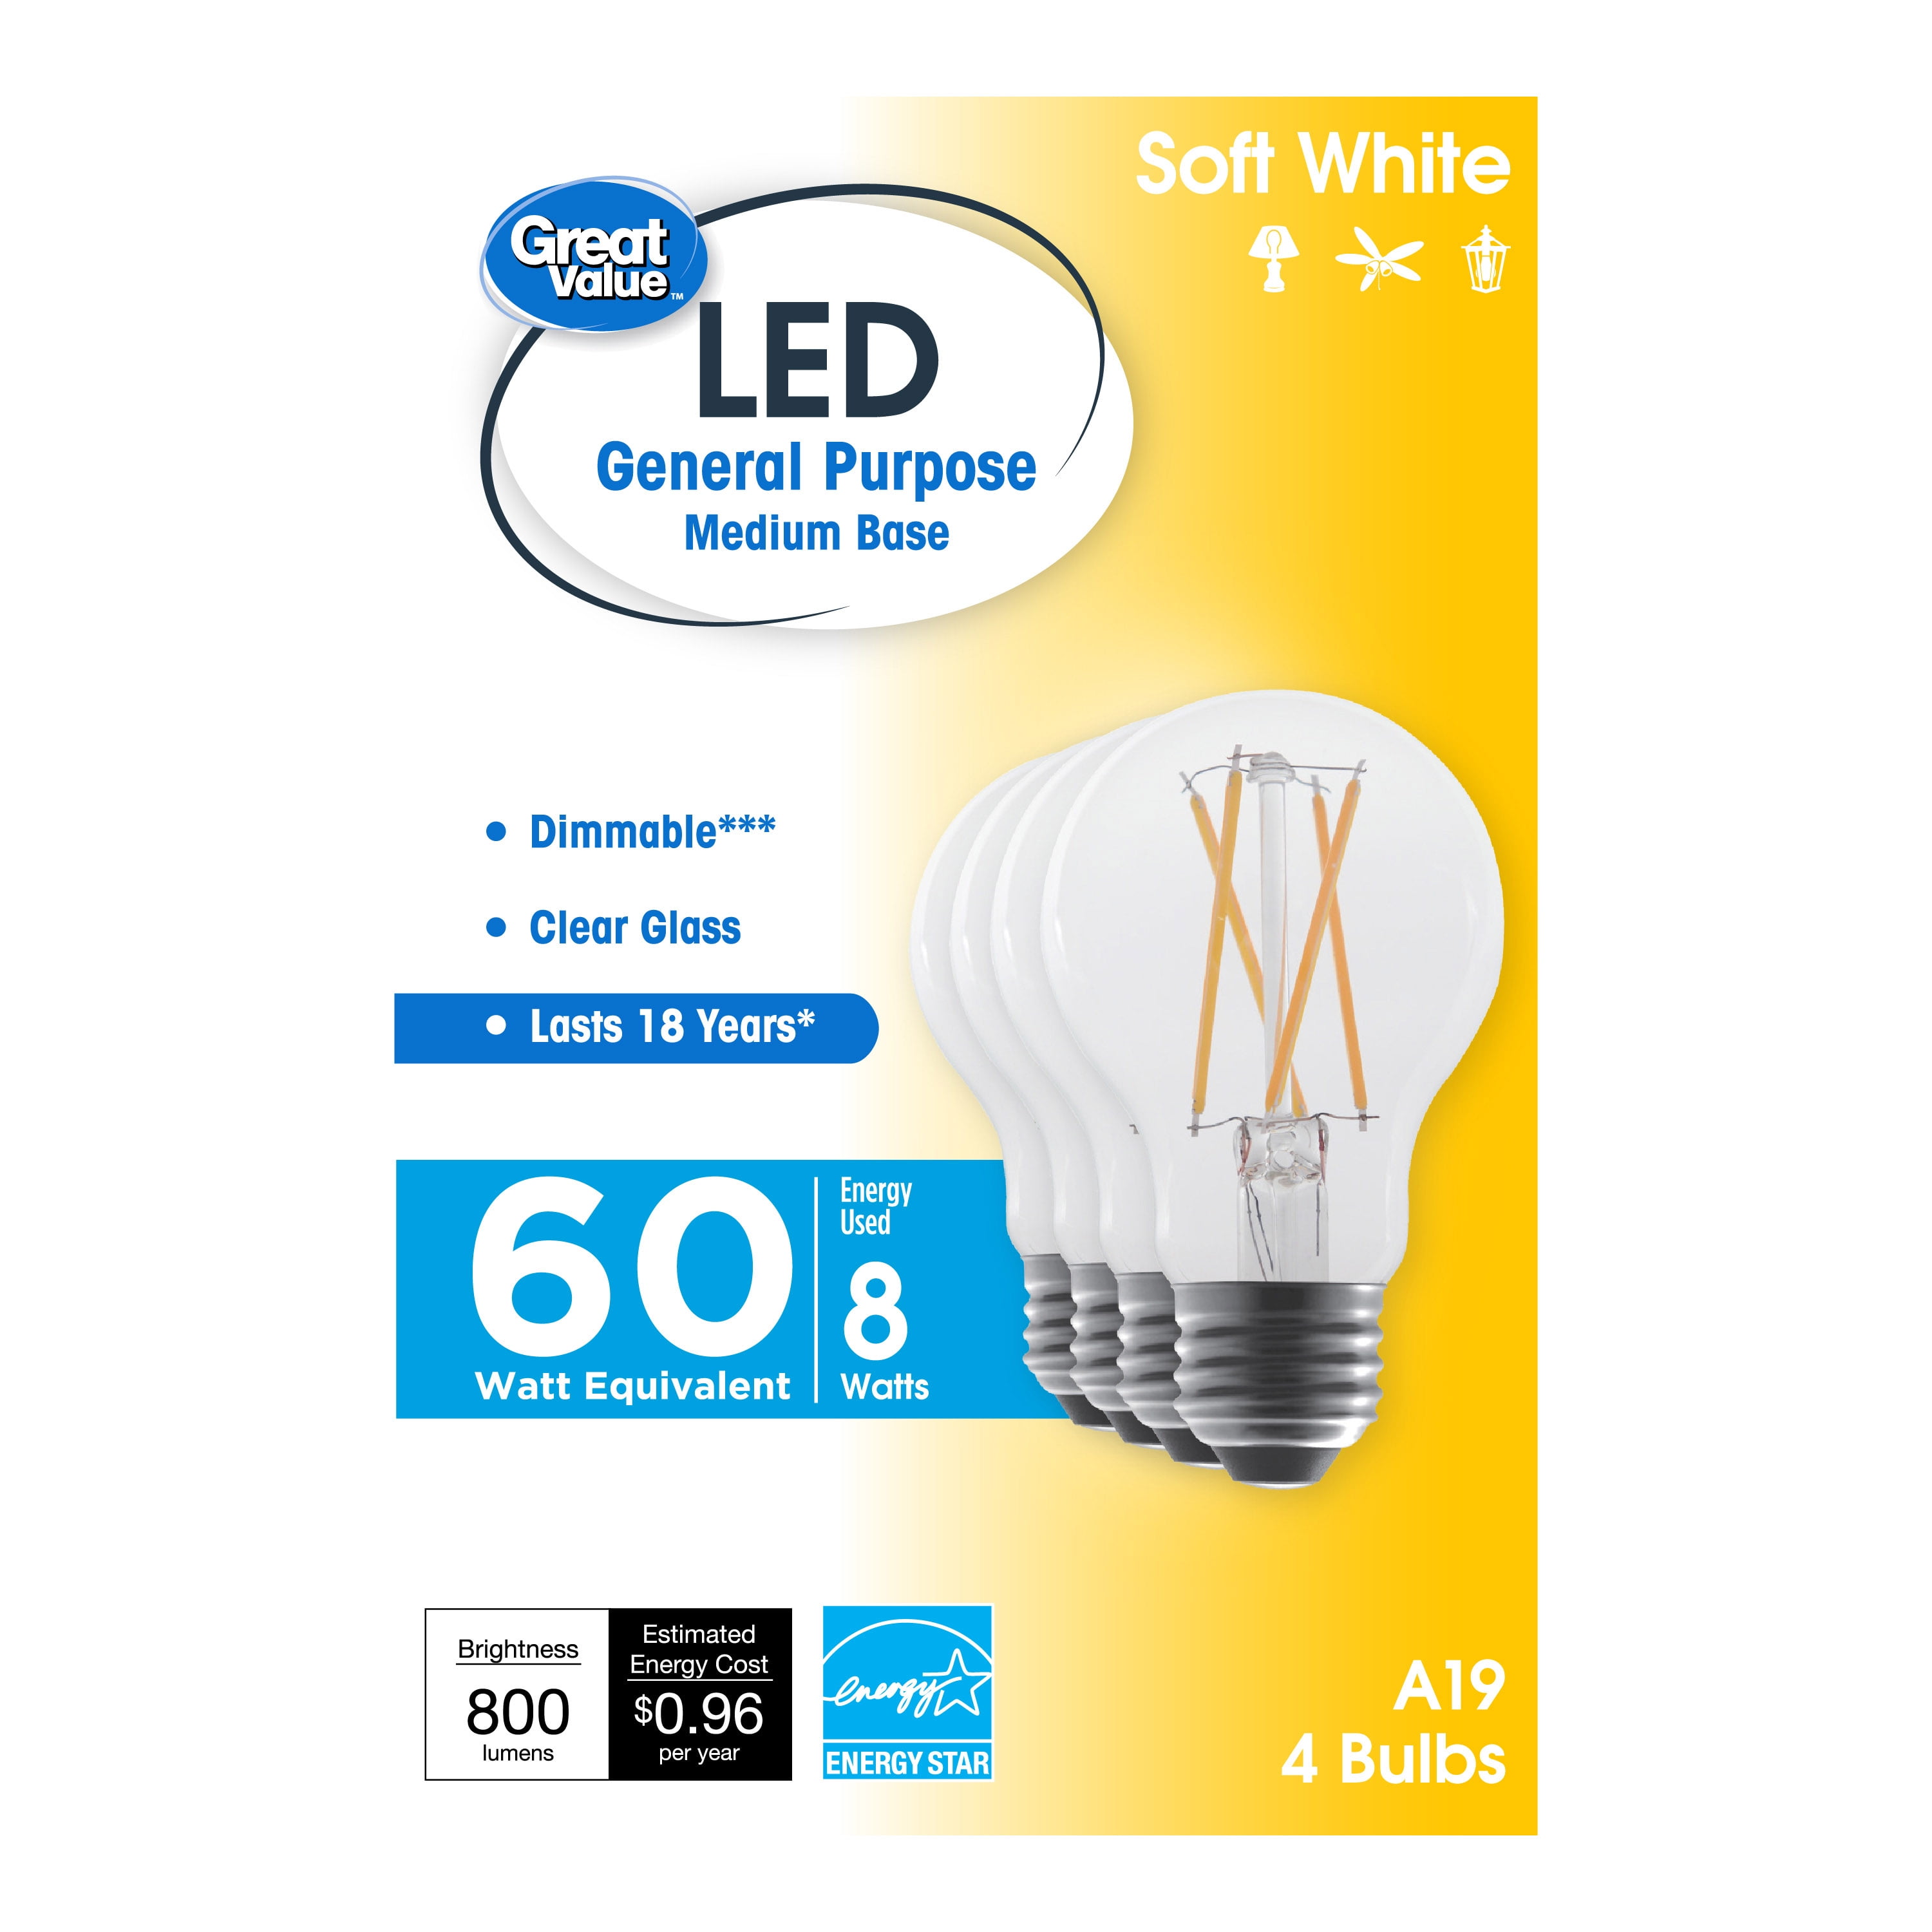 Great Value 18 Year LED Light Bulbs, A19 60 Watts Equivalent, 8 Watts Efficient, Soft White Clear, Glass, 4 Pack